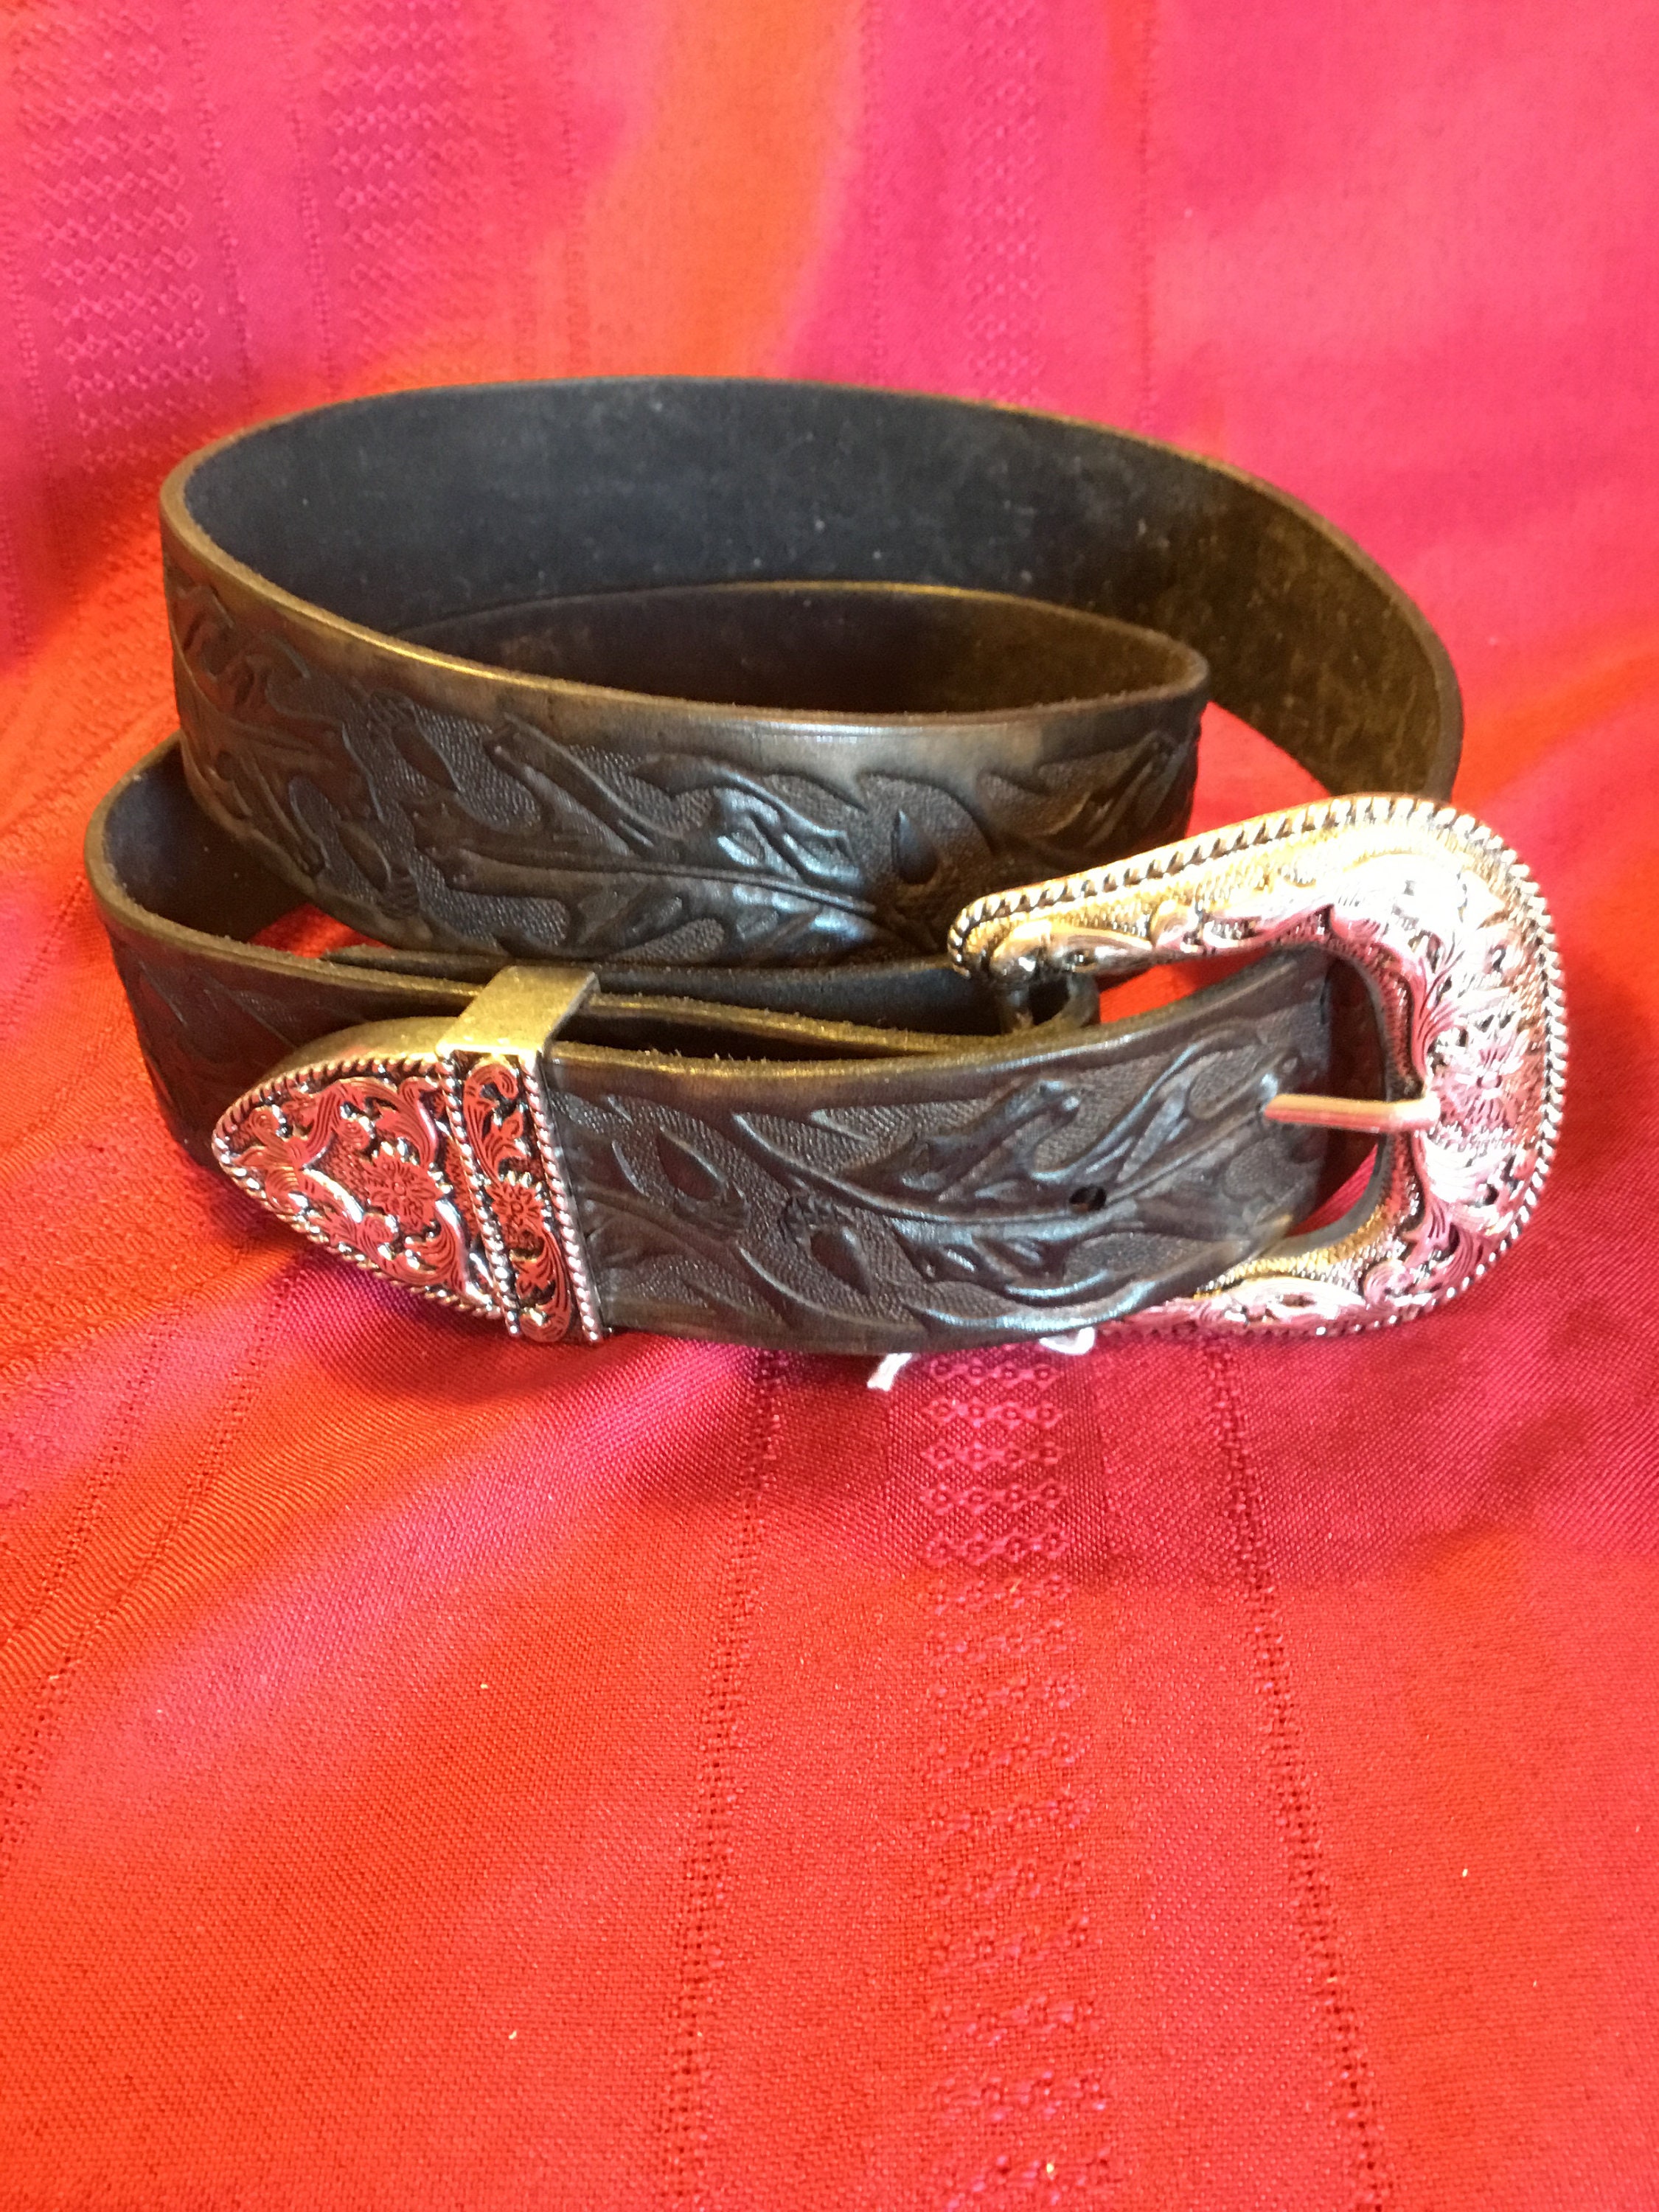 Black Embossed Leather Belt Buckle With Accents, Country Western